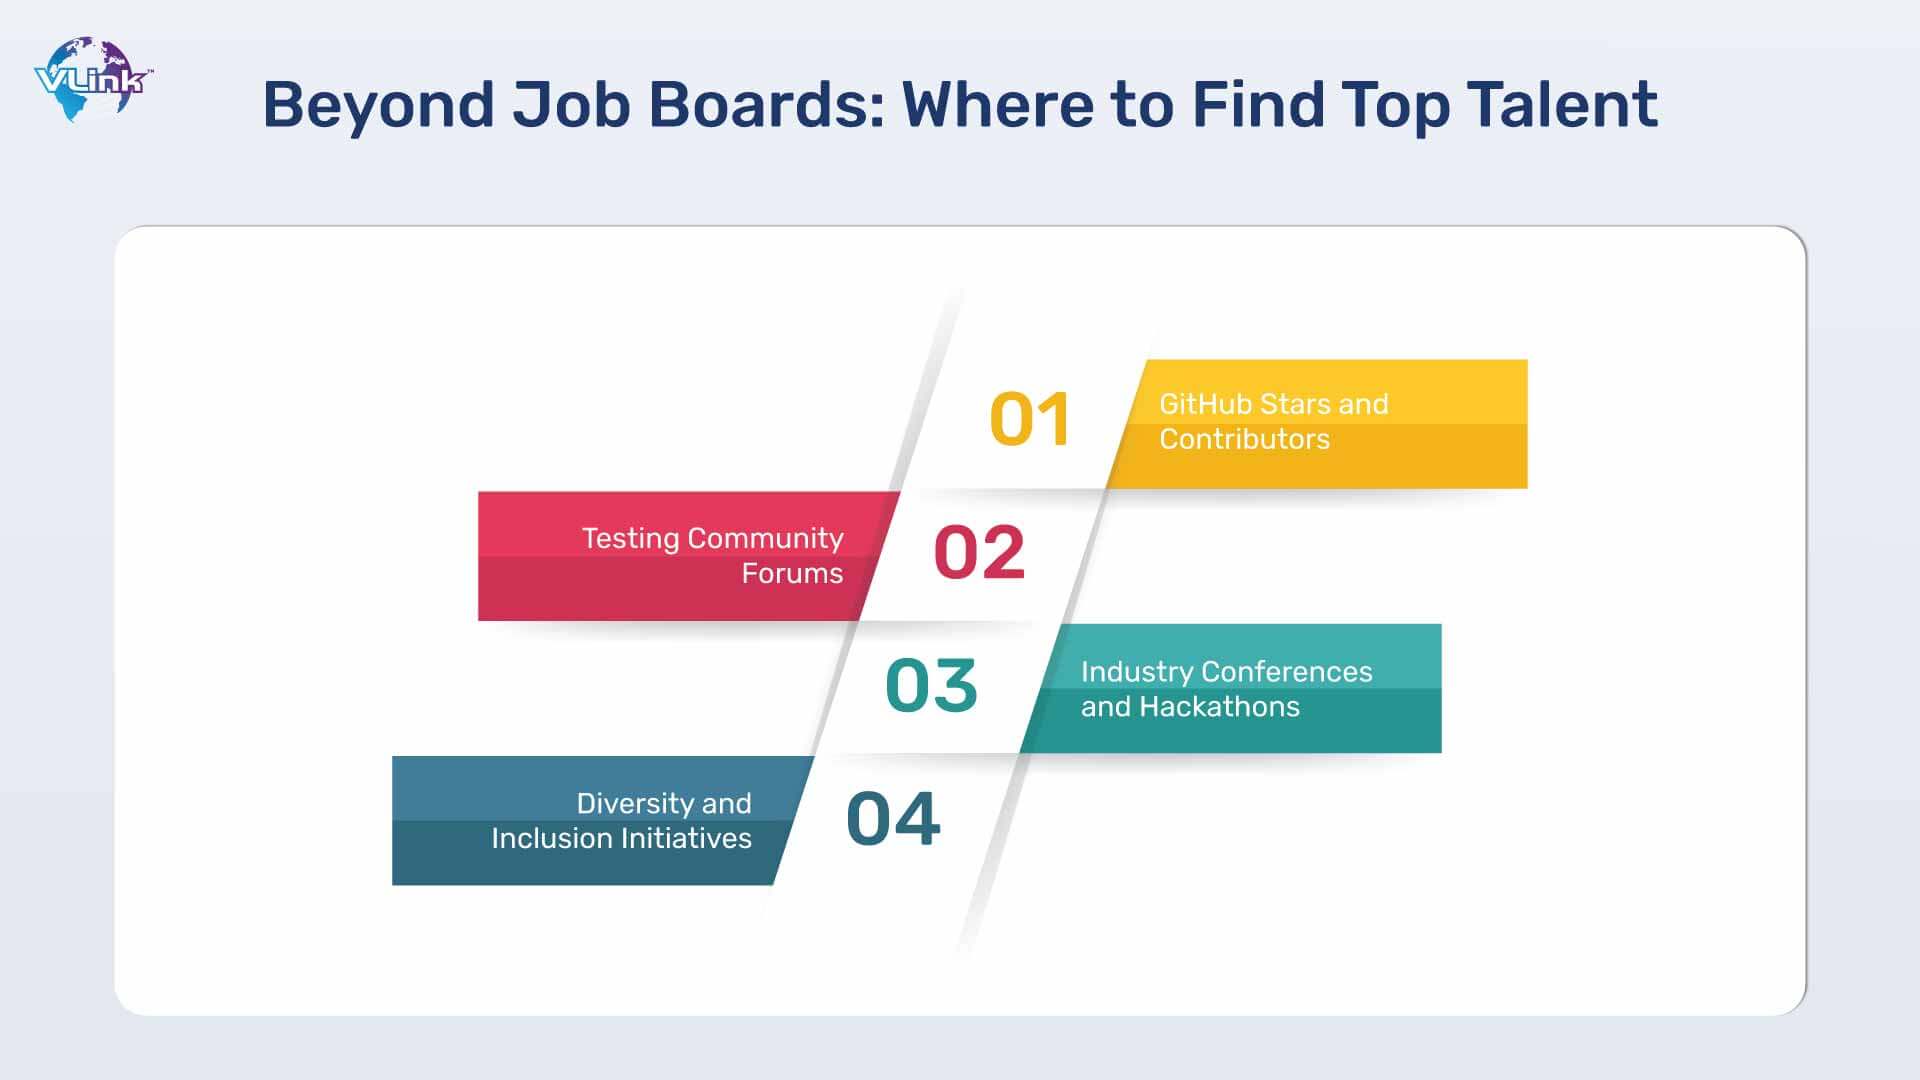 Beyond Job Boards Where to Find Top Talent